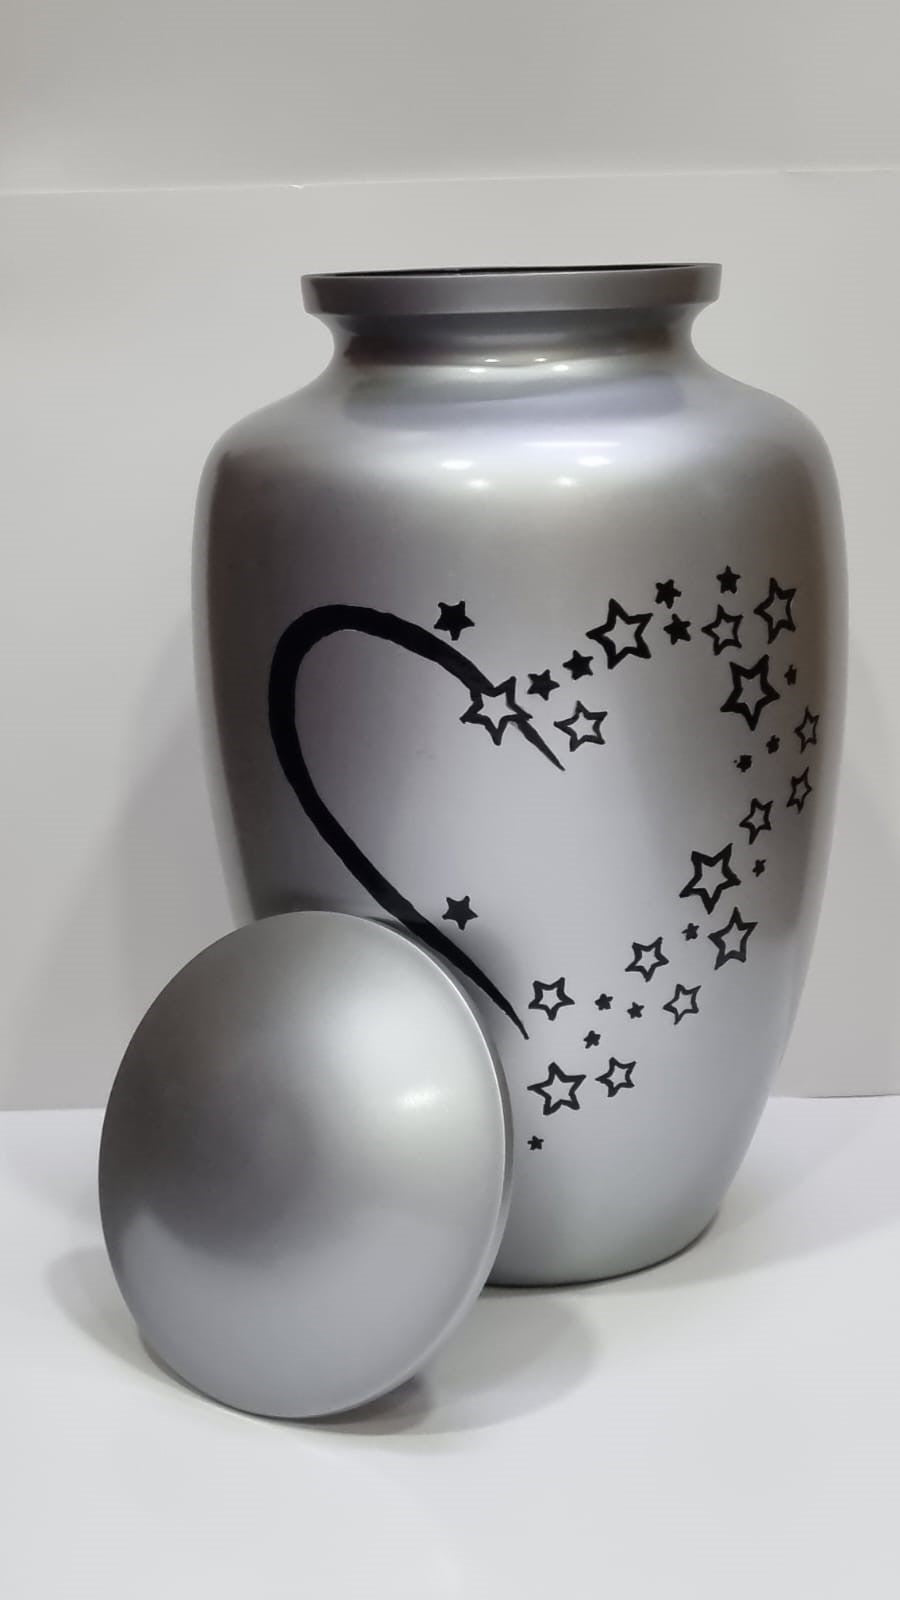 Corazon Adult Ashes Urn-Adult Urn for Ashes-Cremation Urns- The cremation urns for ashes and keepsakes for ashes come in a variety of styles to suit most tastes, decor and different volumes of funeral ashes.